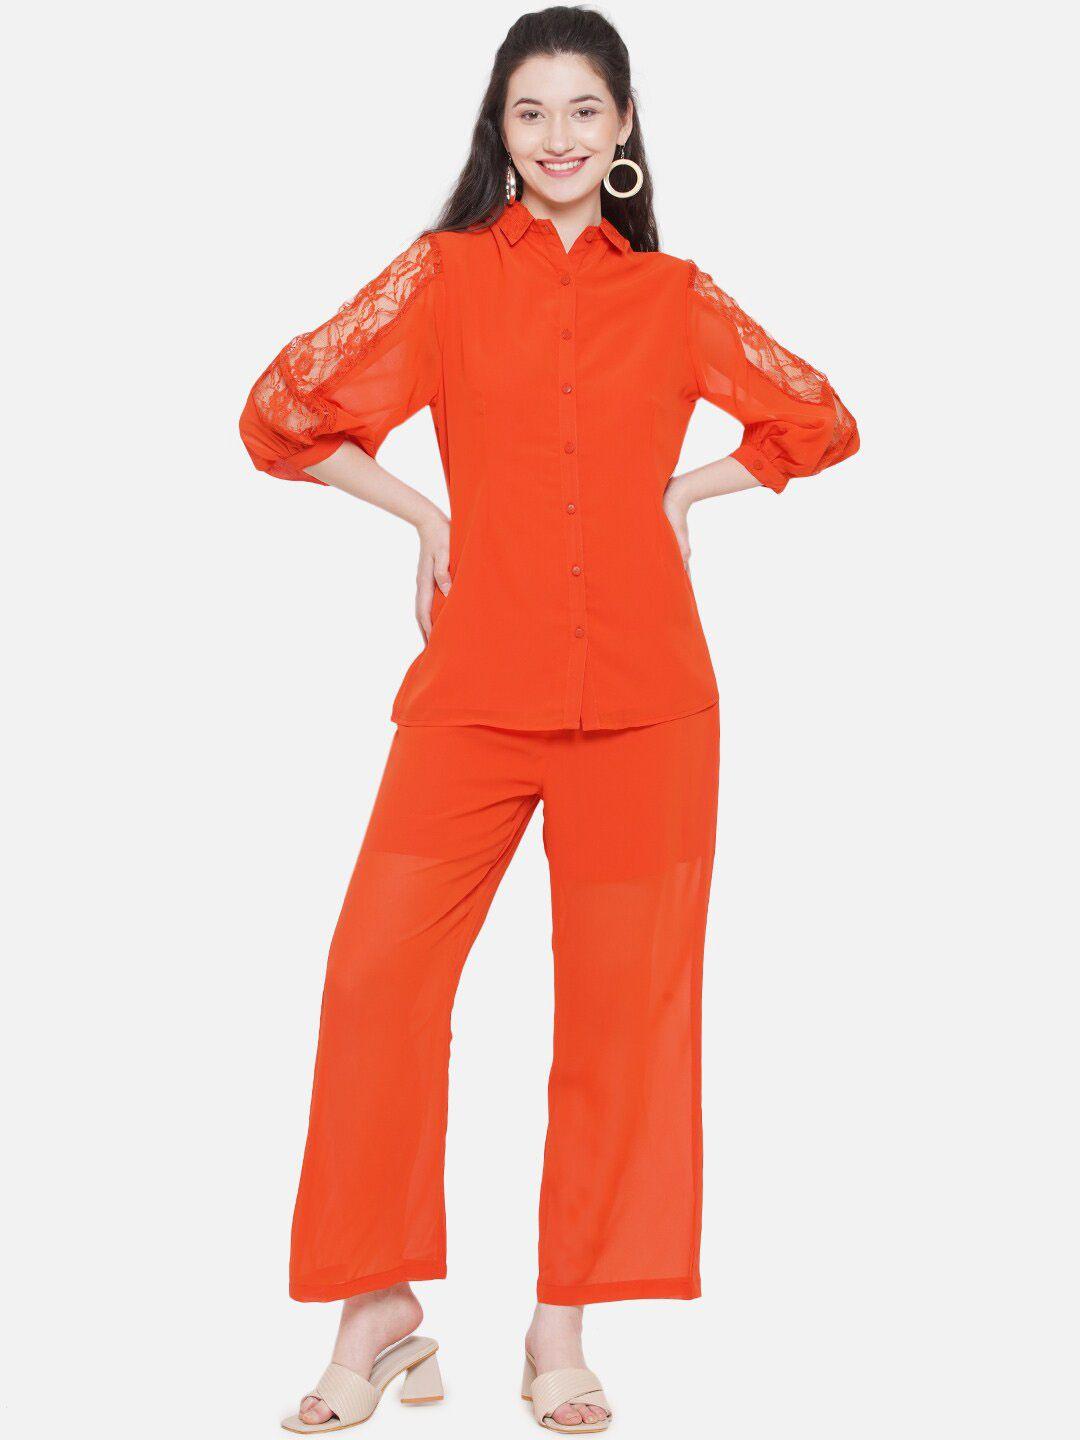 bellamia vana lace shirt collar top and trousers